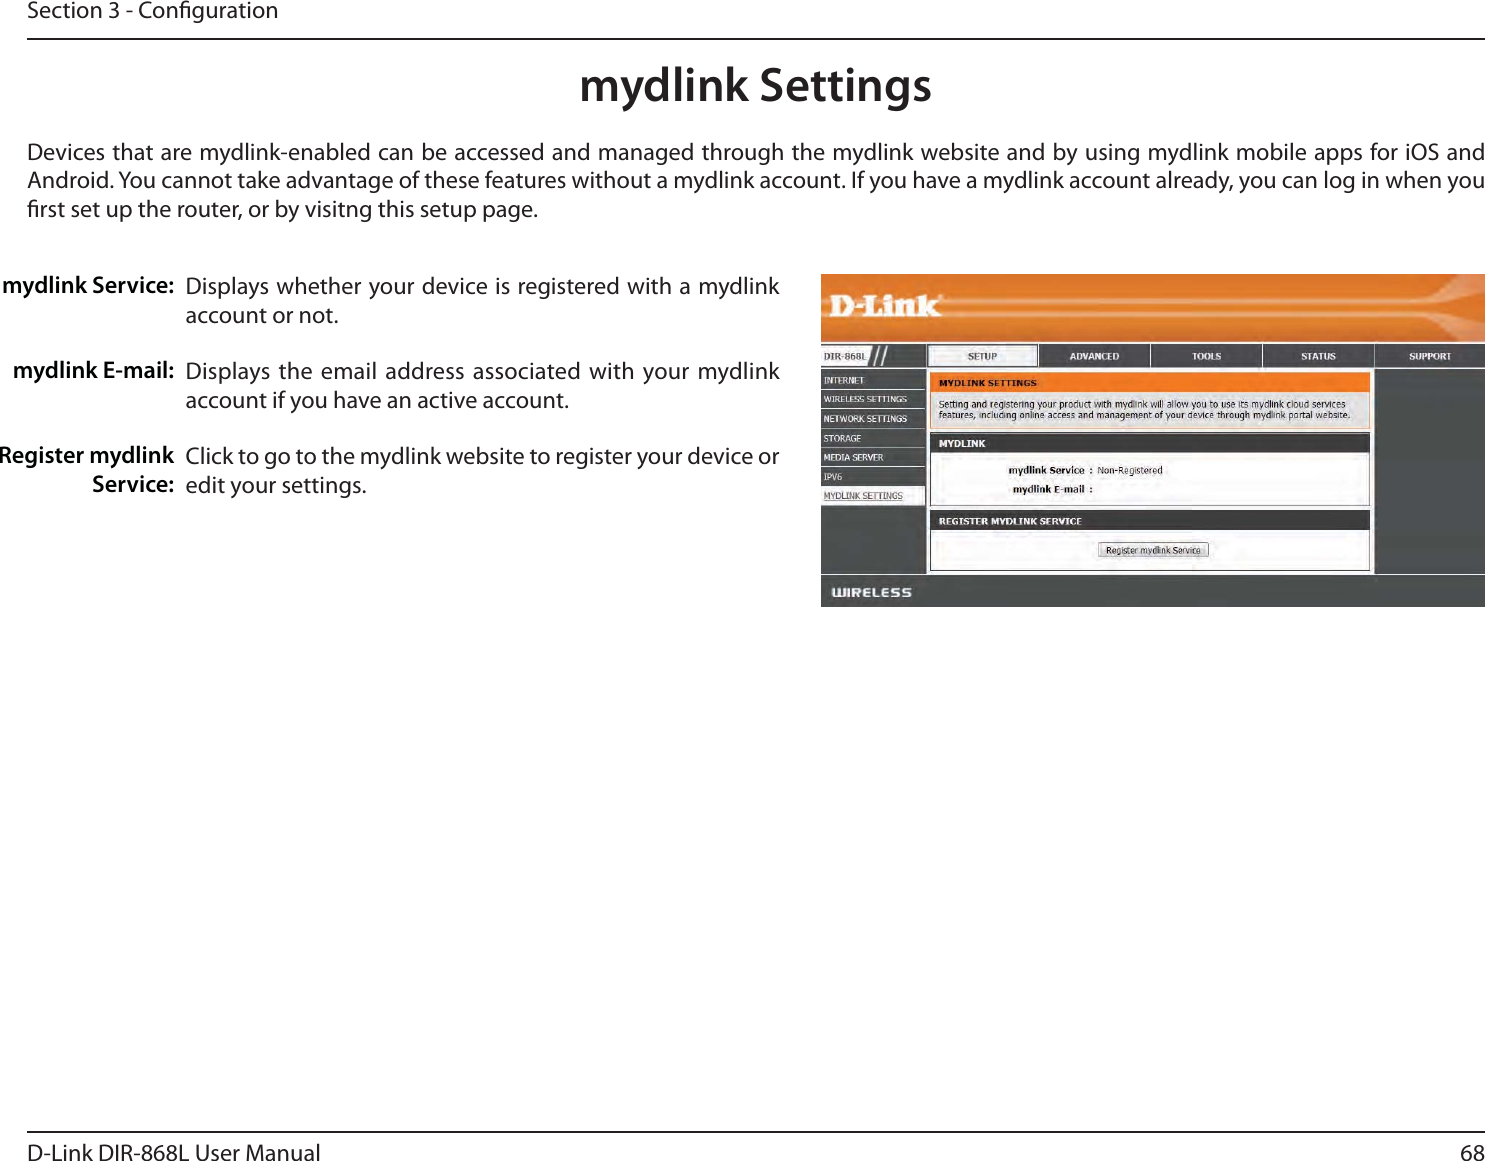 68D-Link DIR-868L User ManualSection 3 - Congurationmydlink SettingsDisplays whether your device is registered with a mydlink account or not.Displays the email address associated with your mydlink account if you have an active account.Click to go to the mydlink website to register your device or edit your settings.mydlink Service:mydlink E-mail:Register mydlink Service:Devices that are mydlink-enabled can be accessed and managed through the mydlink website and by using mydlink mobile apps for iOS and Android. You cannot take advantage of these features without a mydlink account. If you have a mydlink account already, you can log in when you rst set up the router, or by visitng this setup page.